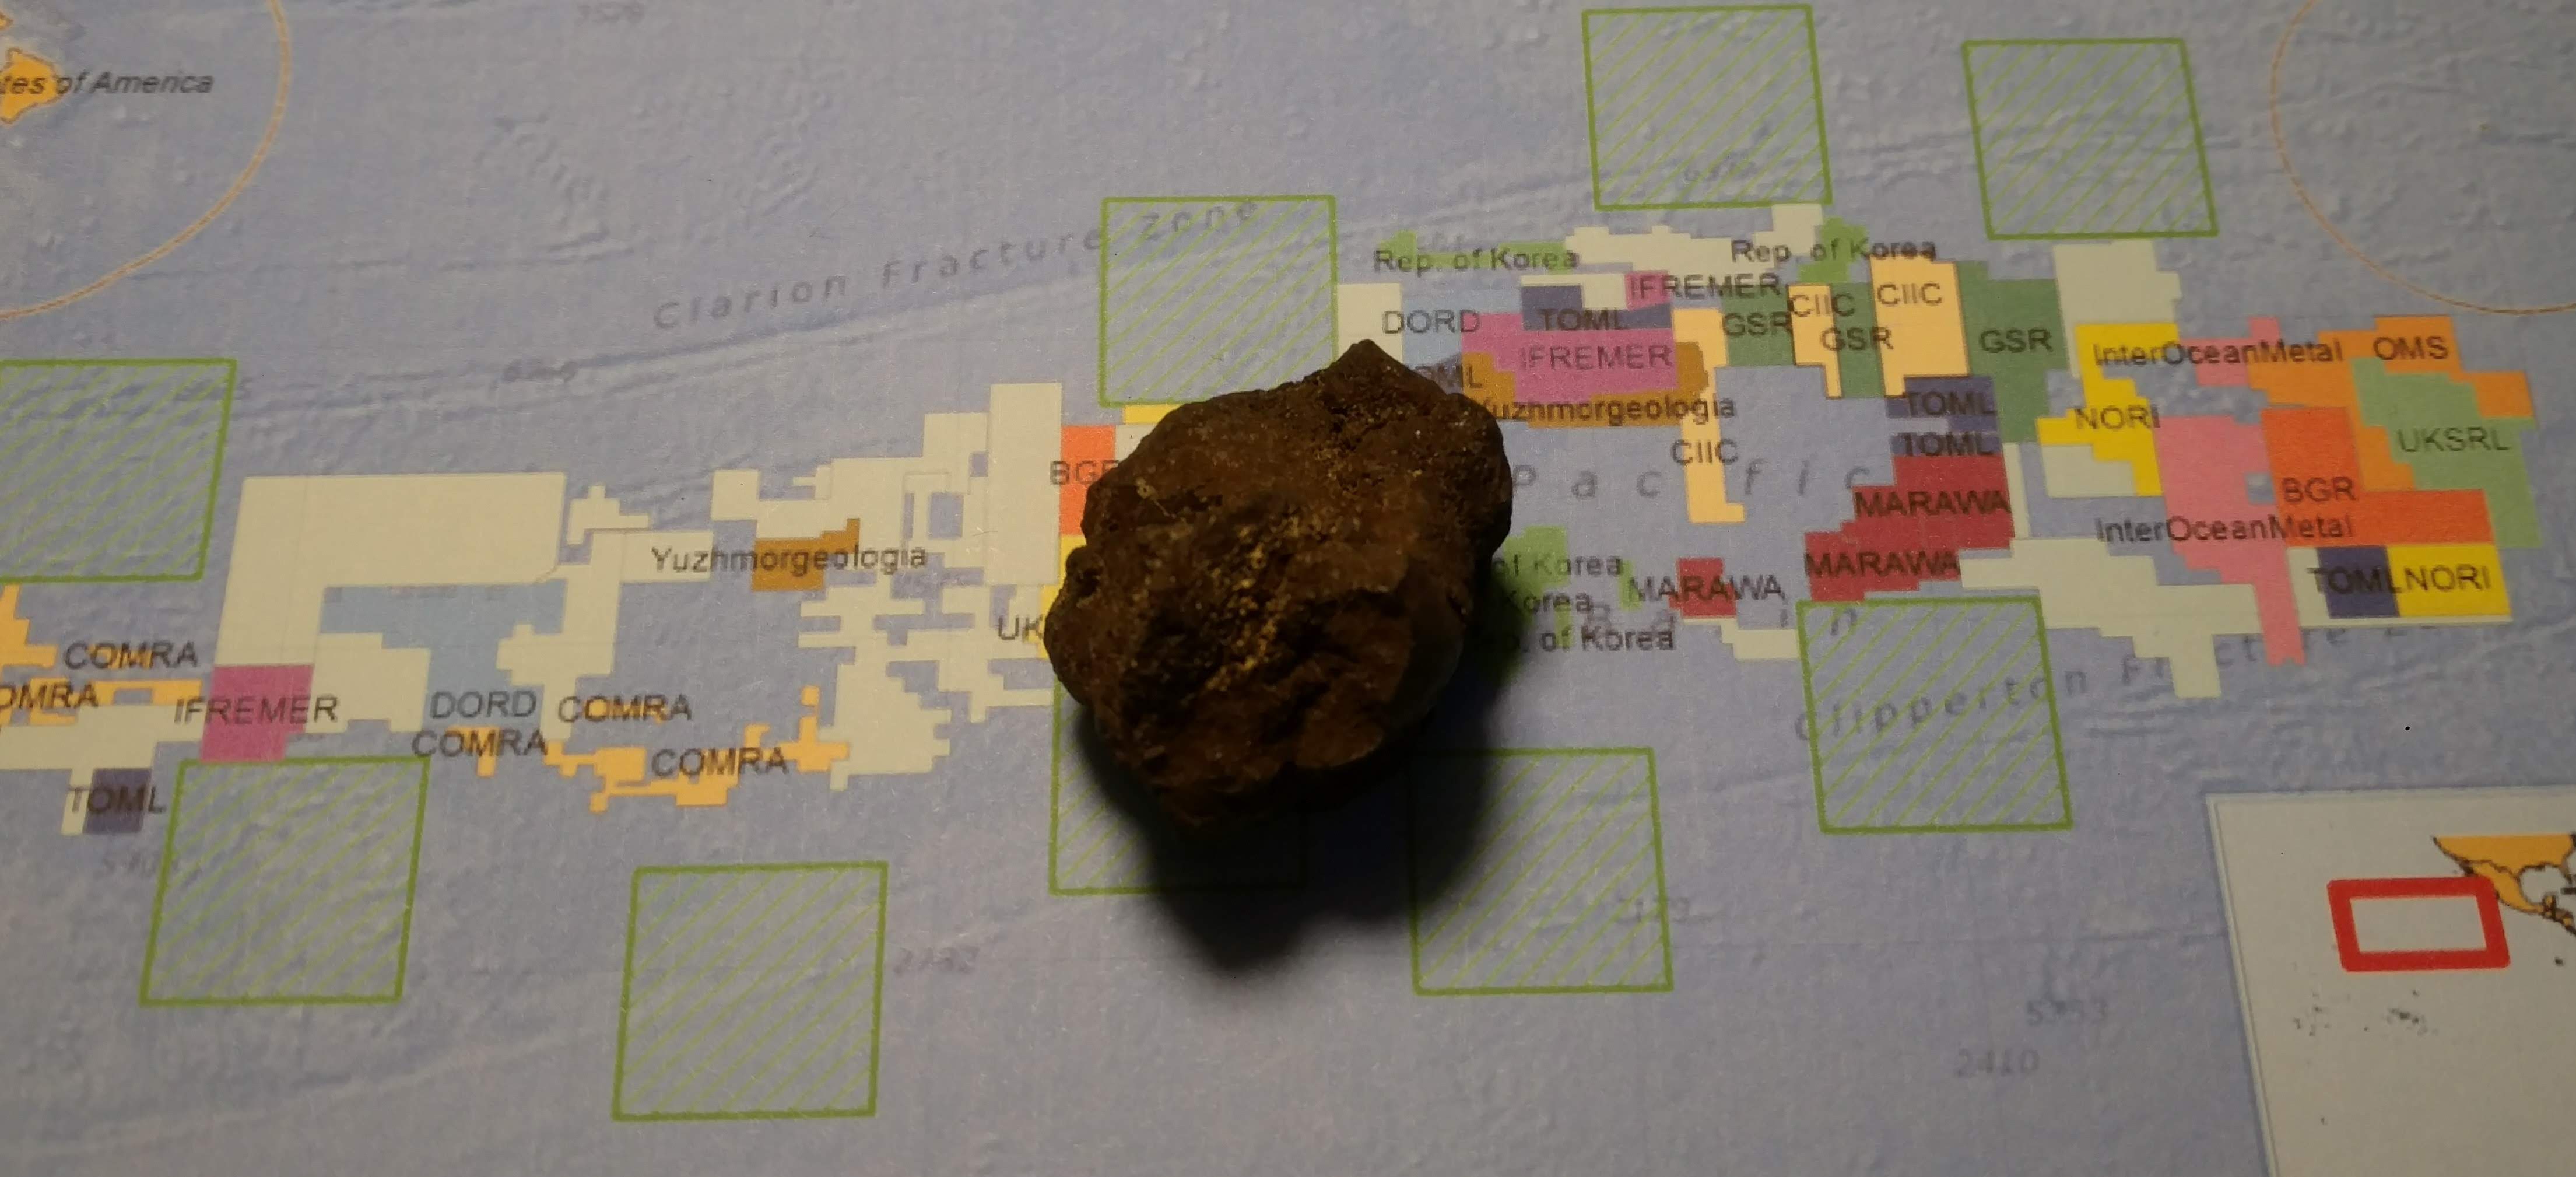 A polymetallic nodule from the Clarion Clipperton Fracture Zone, purchased from an online dealer. 